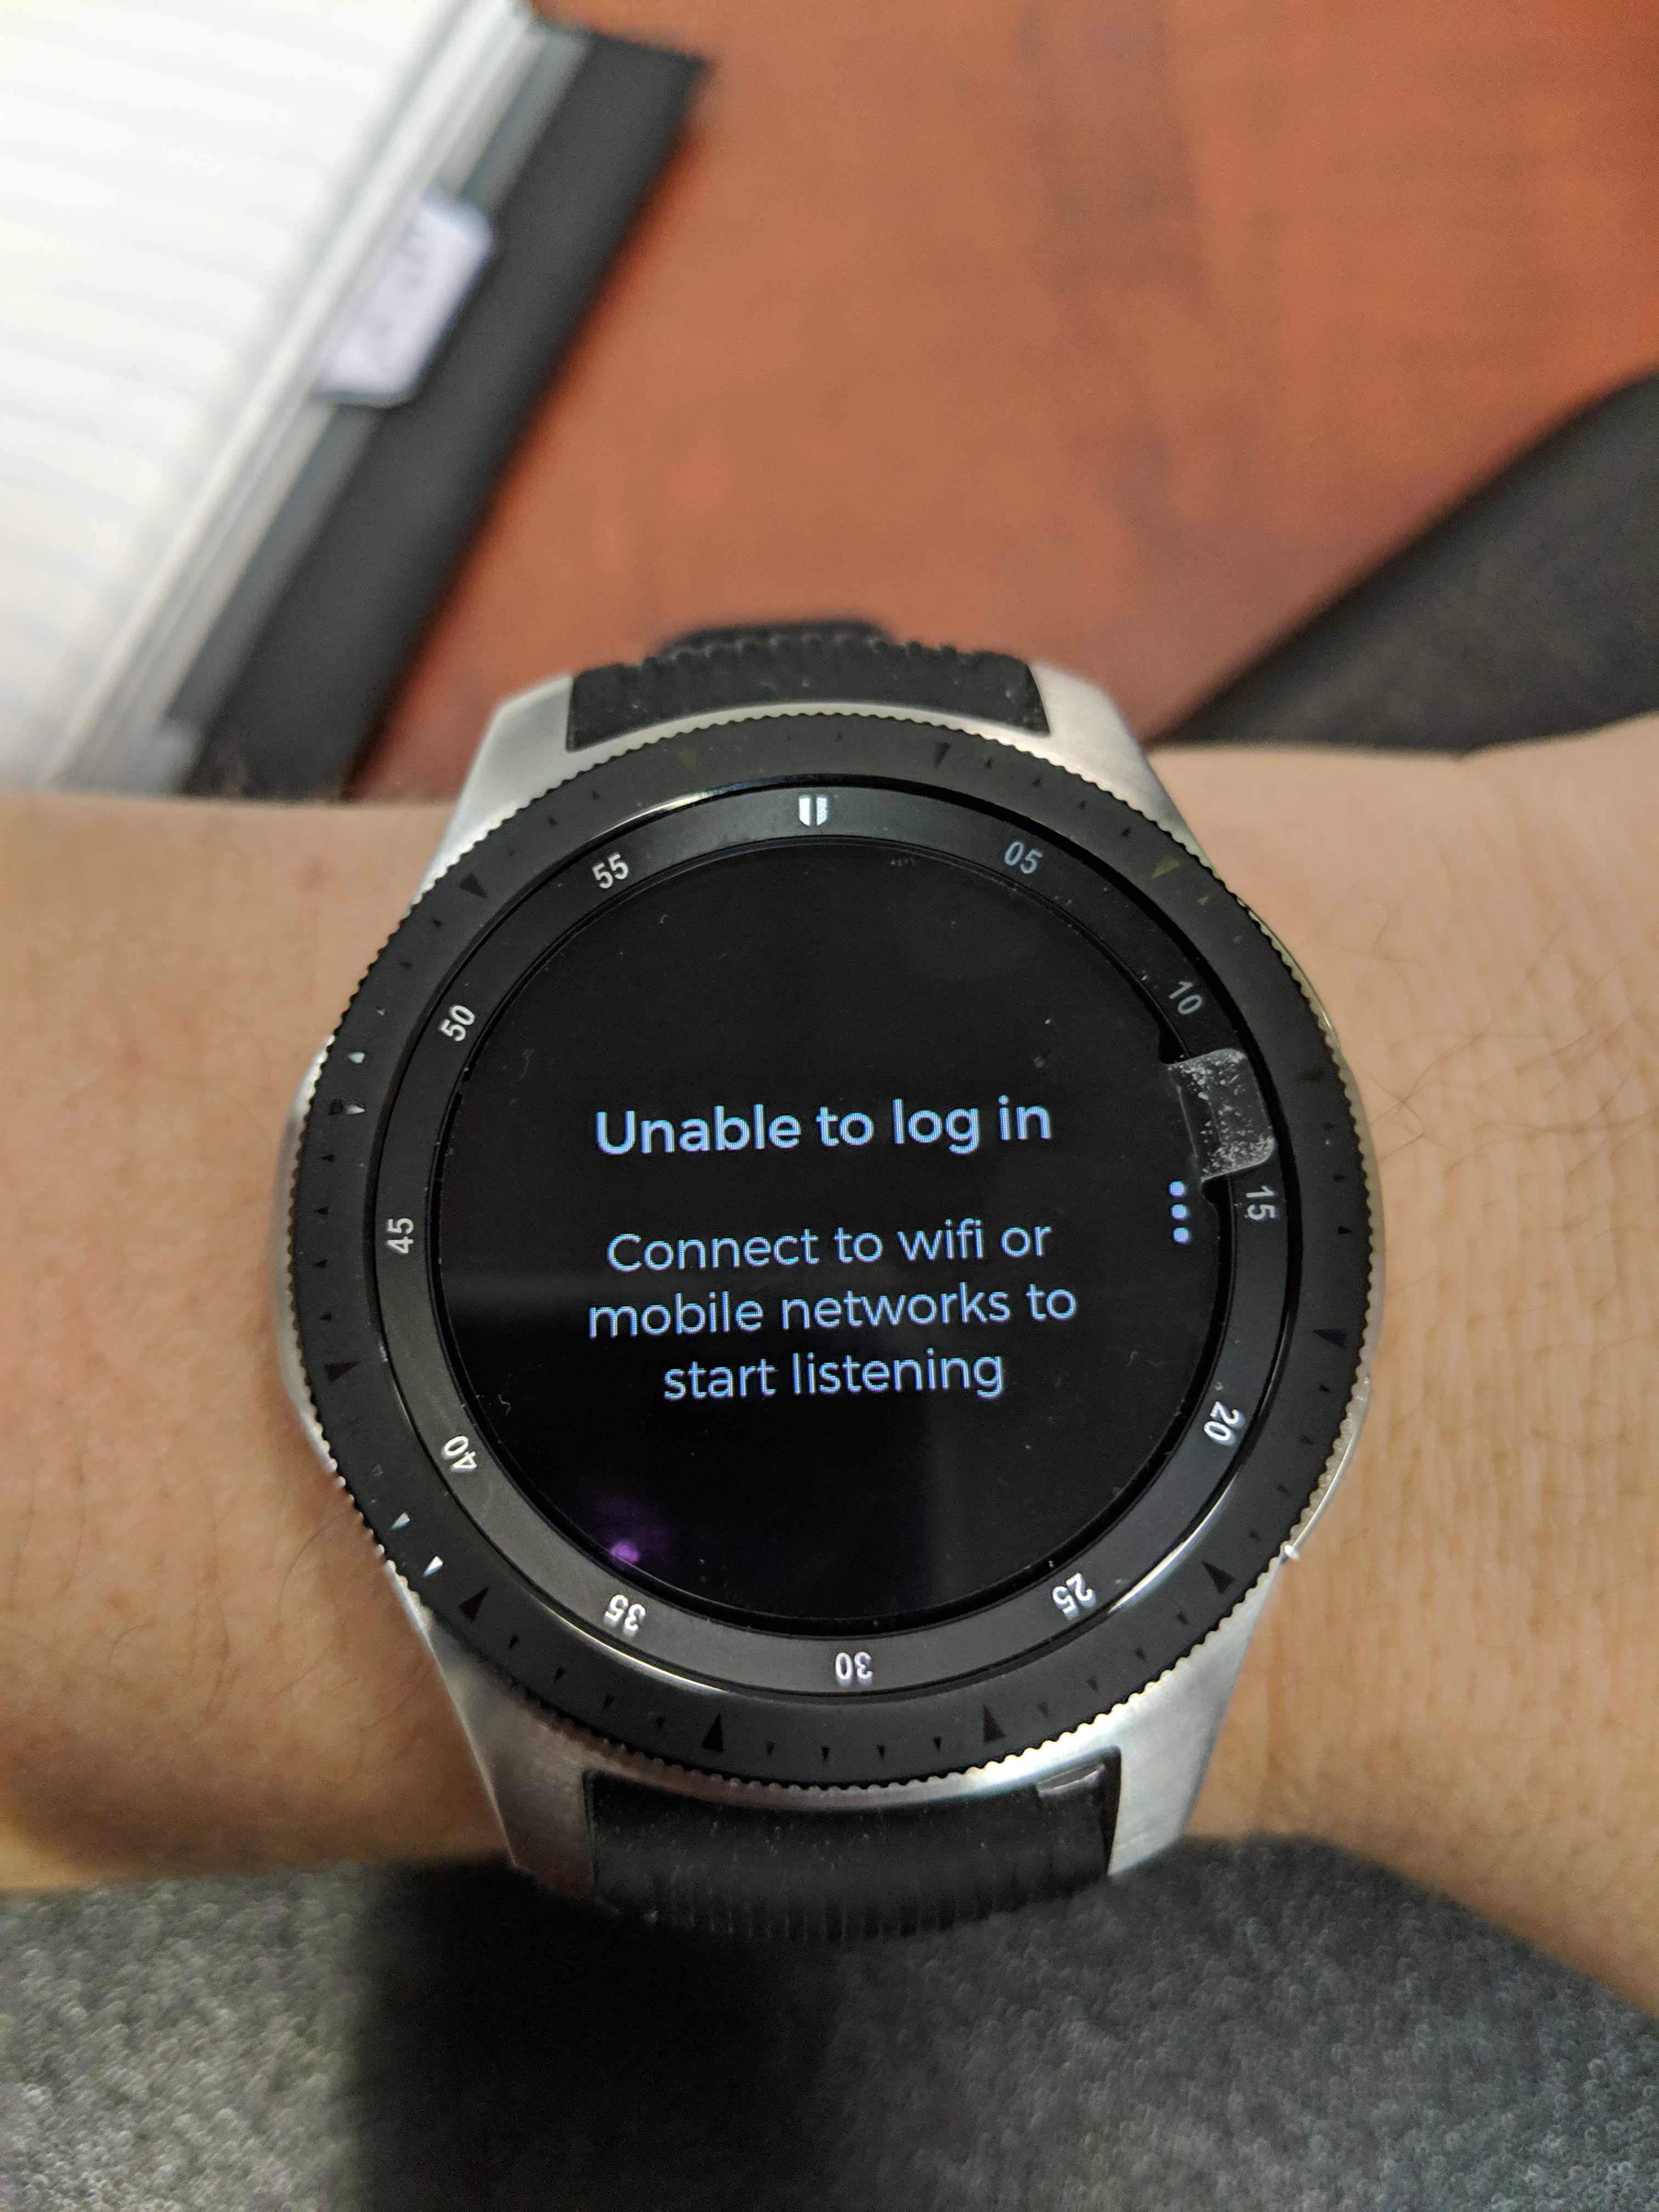 Unable to log into spotify app gear s3 e11